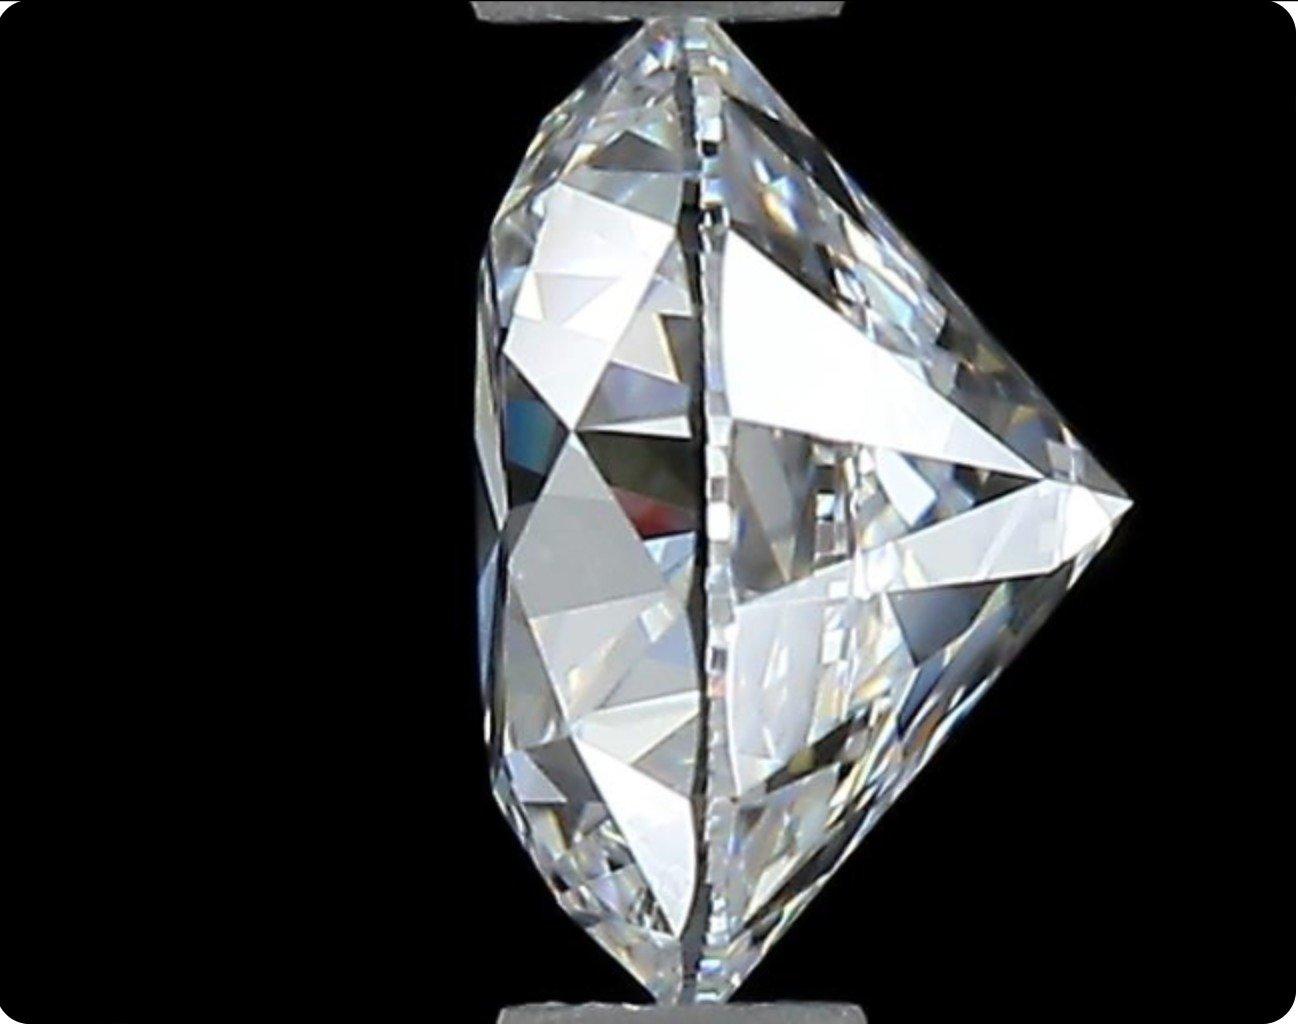 Natural diamond in a 0.52 carat E VS2 Ideal cut Round with GIA Certificate and laser inscription number.

GIA report no. 7411812653

Sku: DSPV-247A